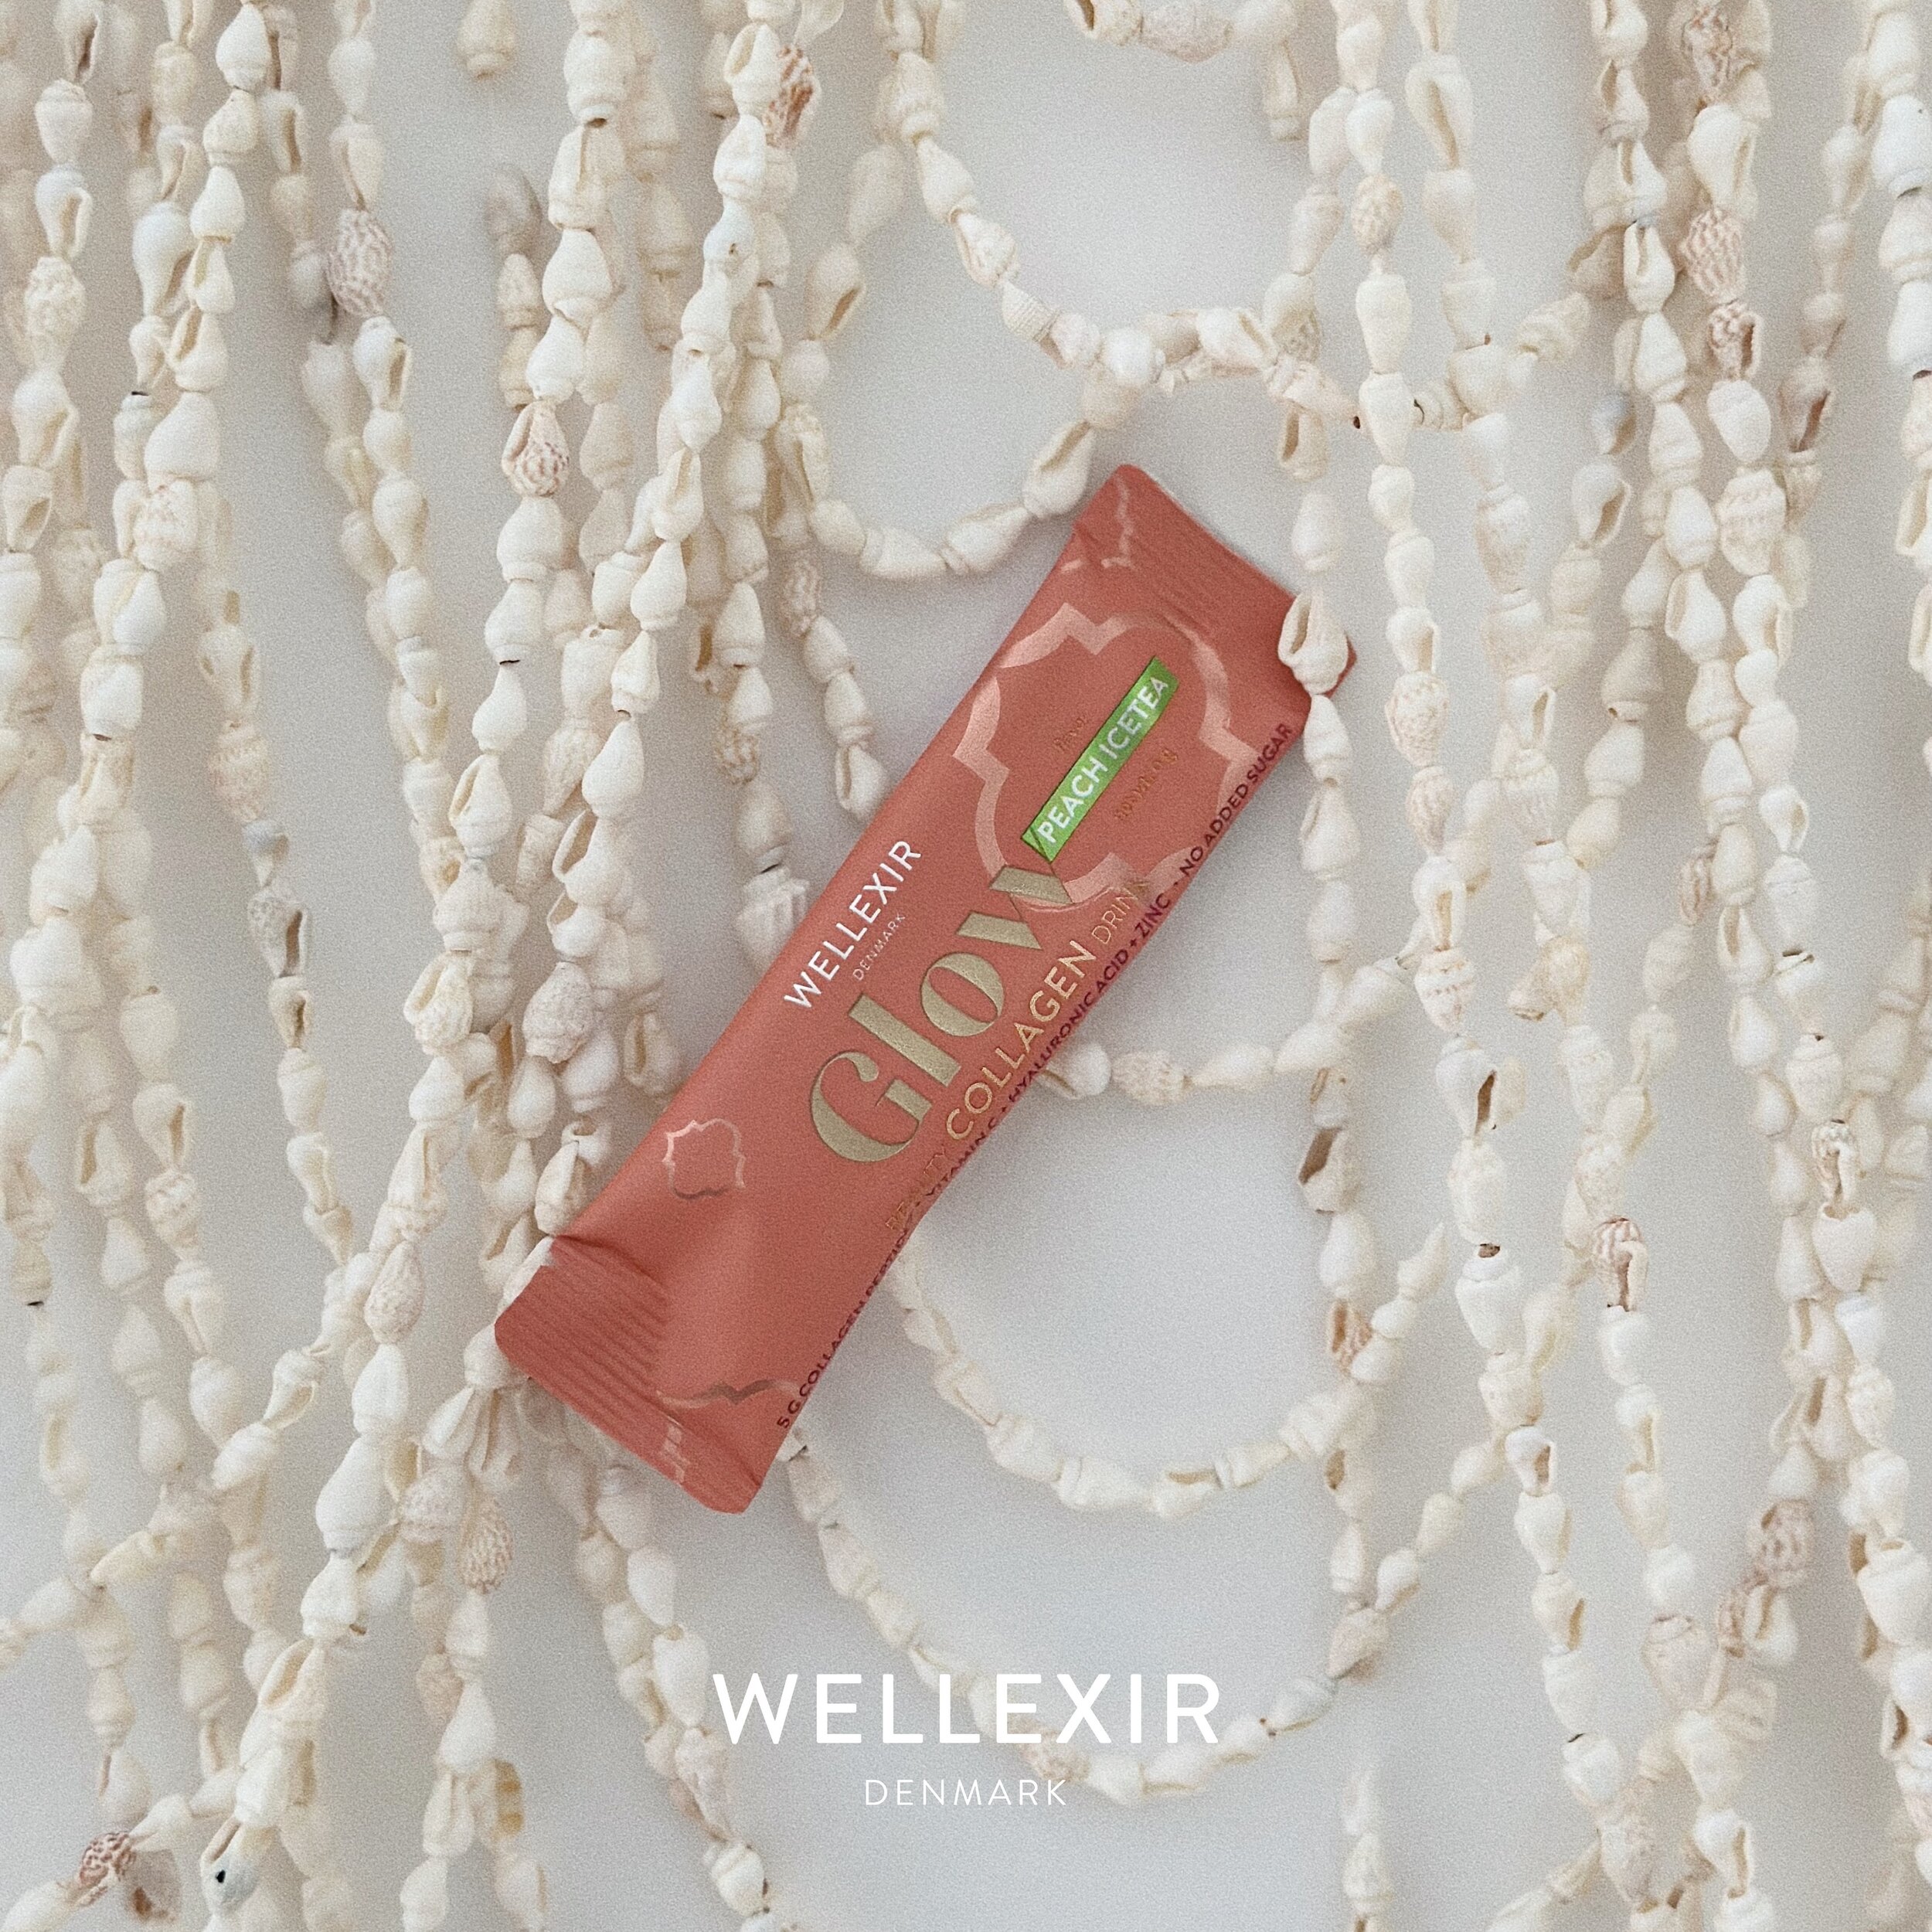 We love Collagen not only because it gives our skin the youthful glow we miss, but also because it has a high protein content and low fat 🍑🤍 #wellexir